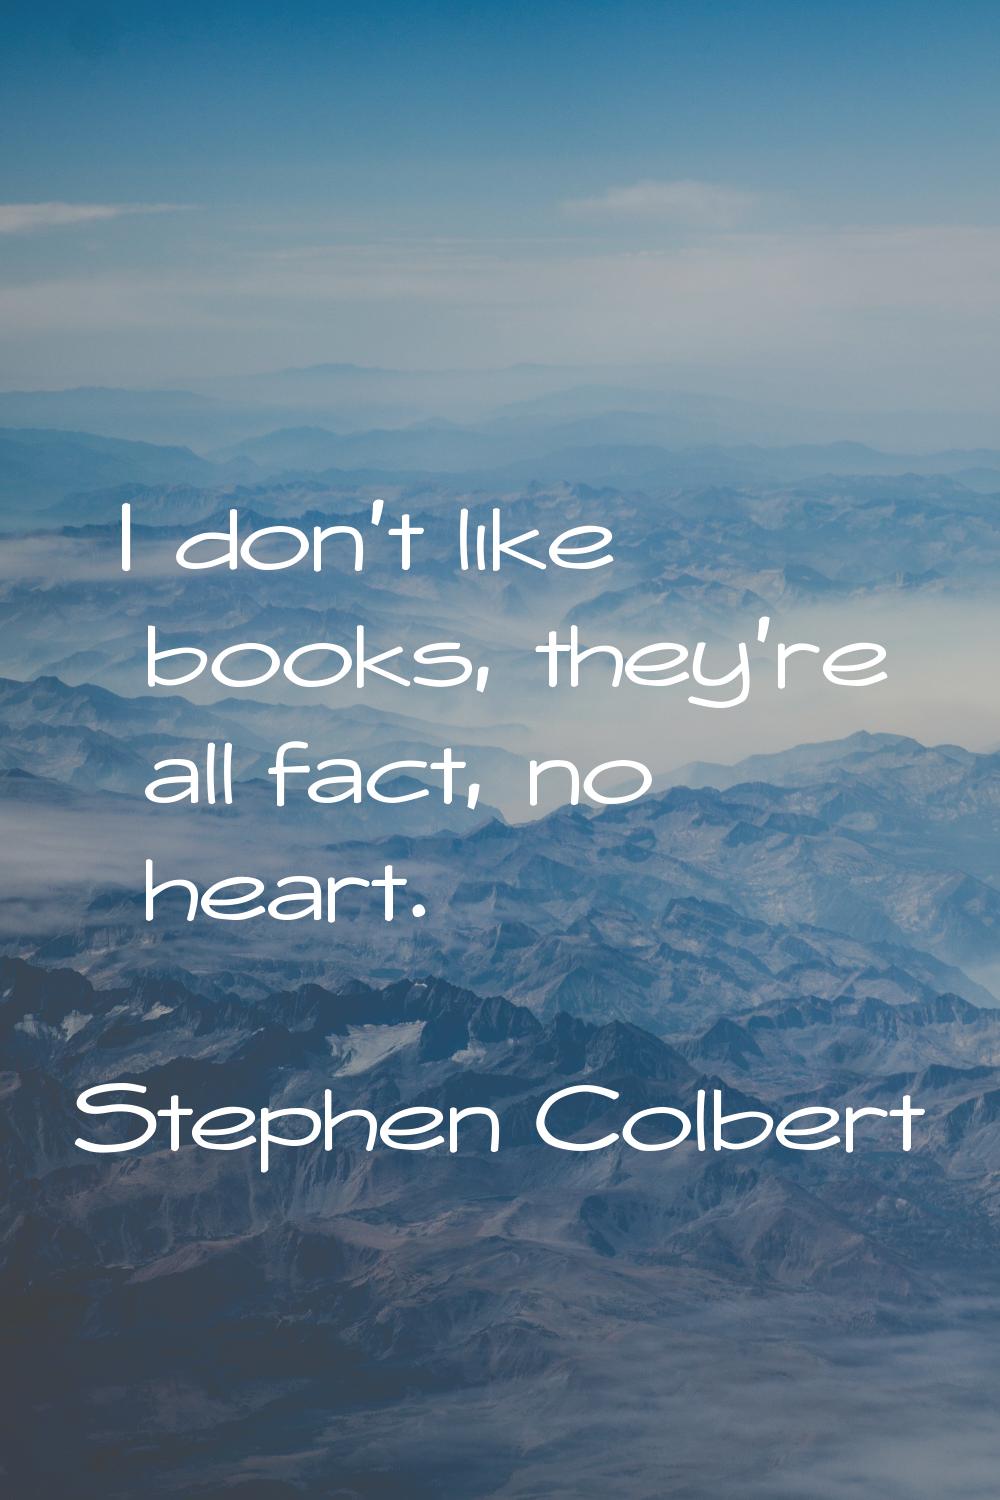 I don't like books, they're all fact, no heart.